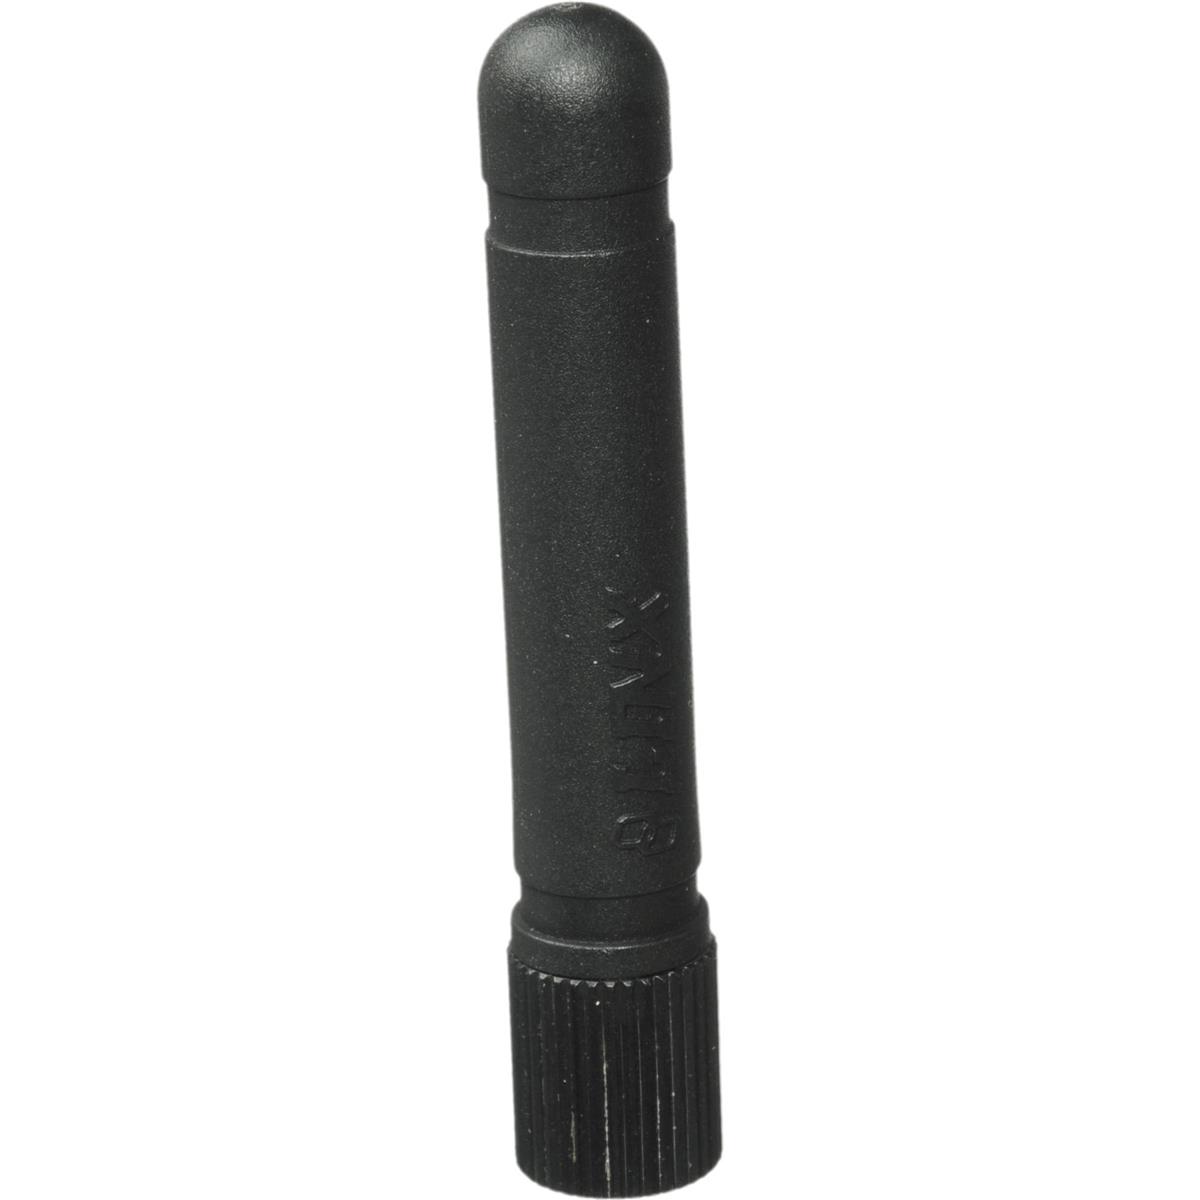 Image of RadioPopper Replacement Antenna for PX Transmitter